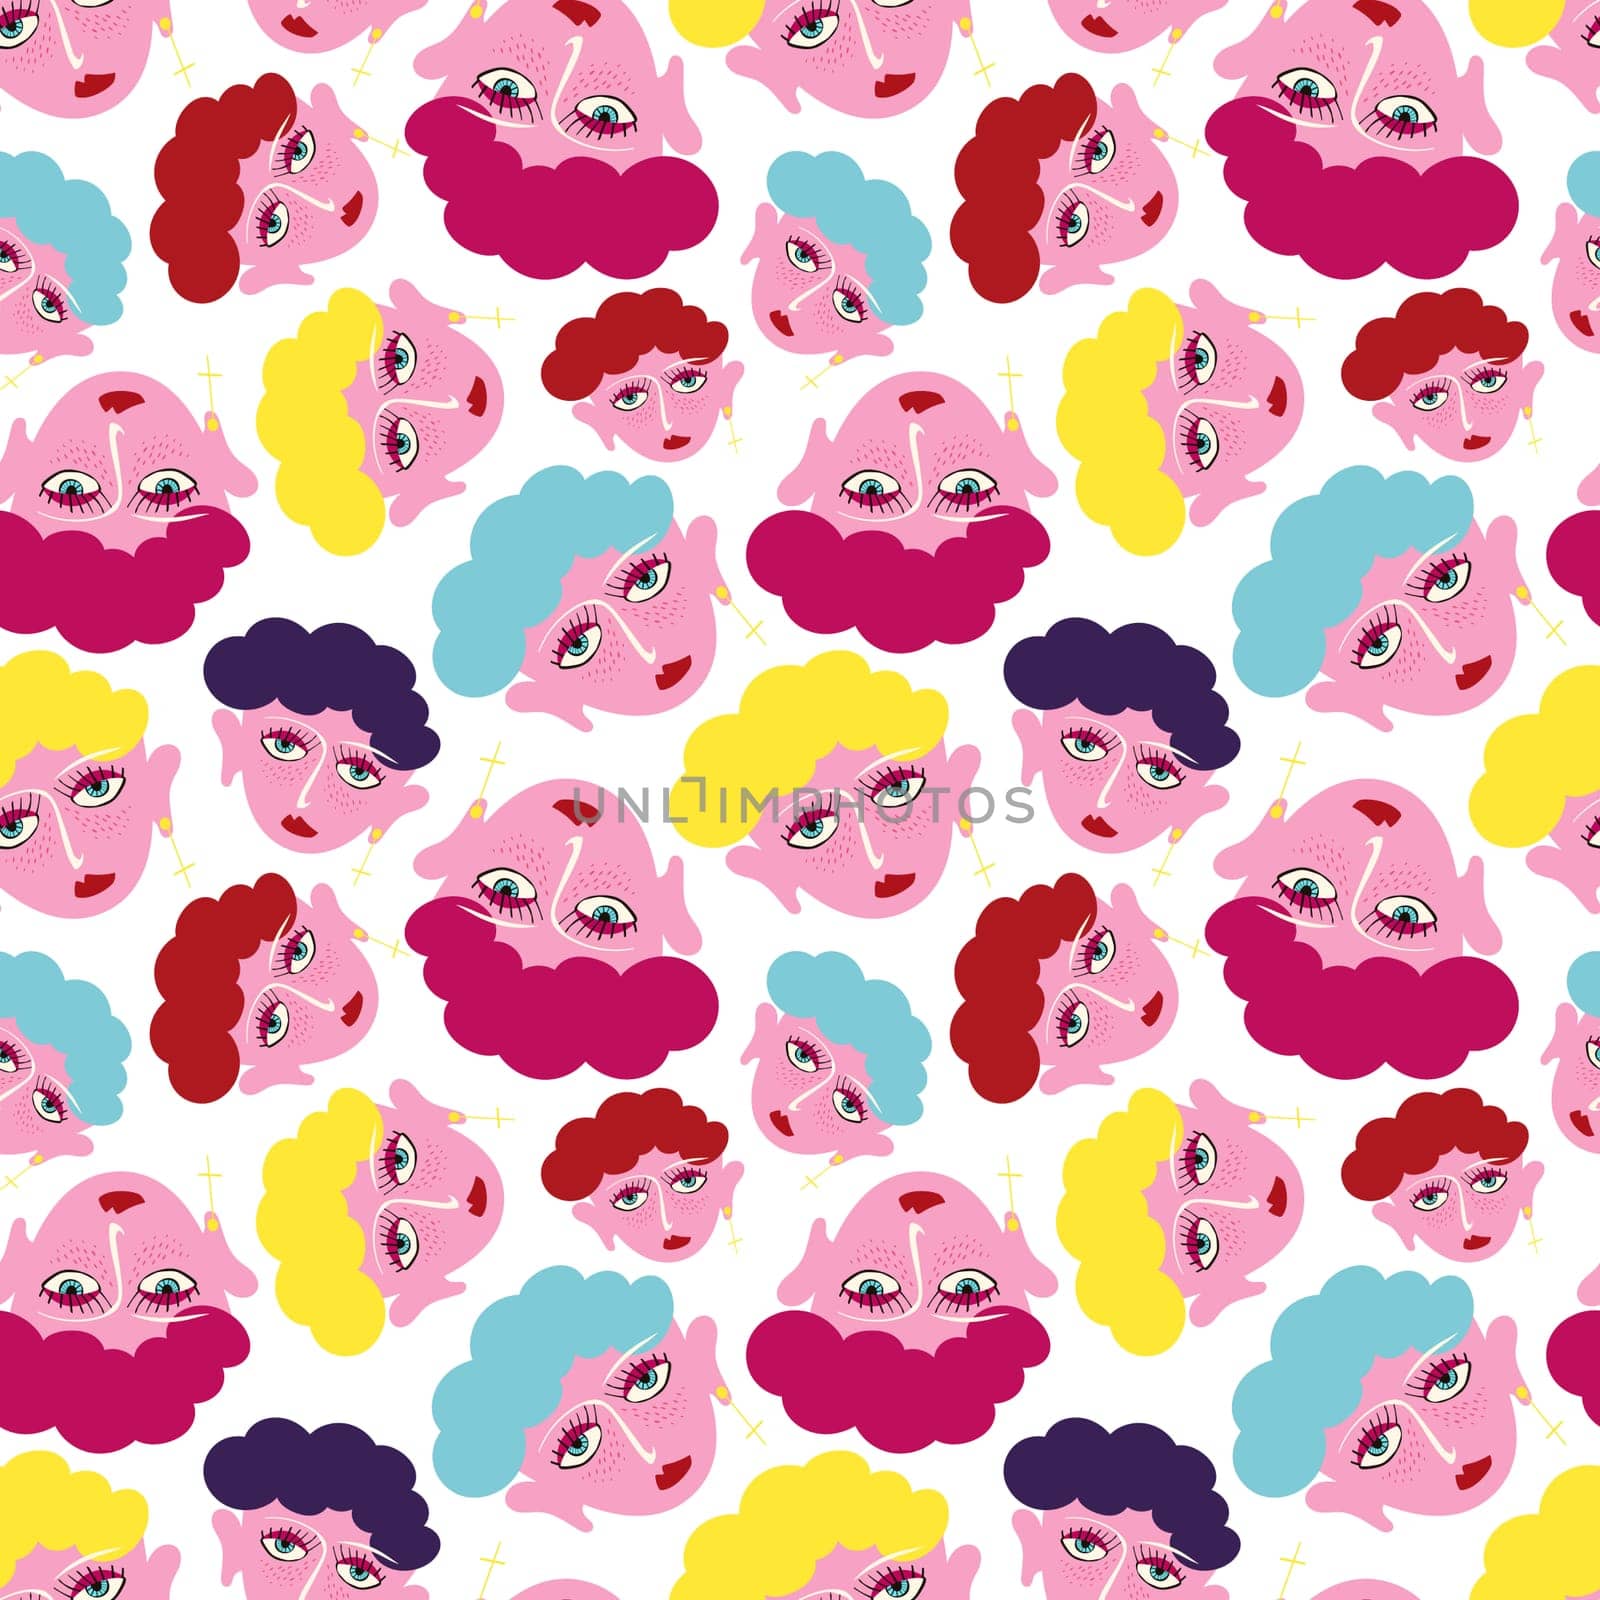 A colorful pattern of cartoon girl faces with lips and eyes. The faces are in various colors and sizes, and they are arranged in a way that creates a sense of movement and energy.